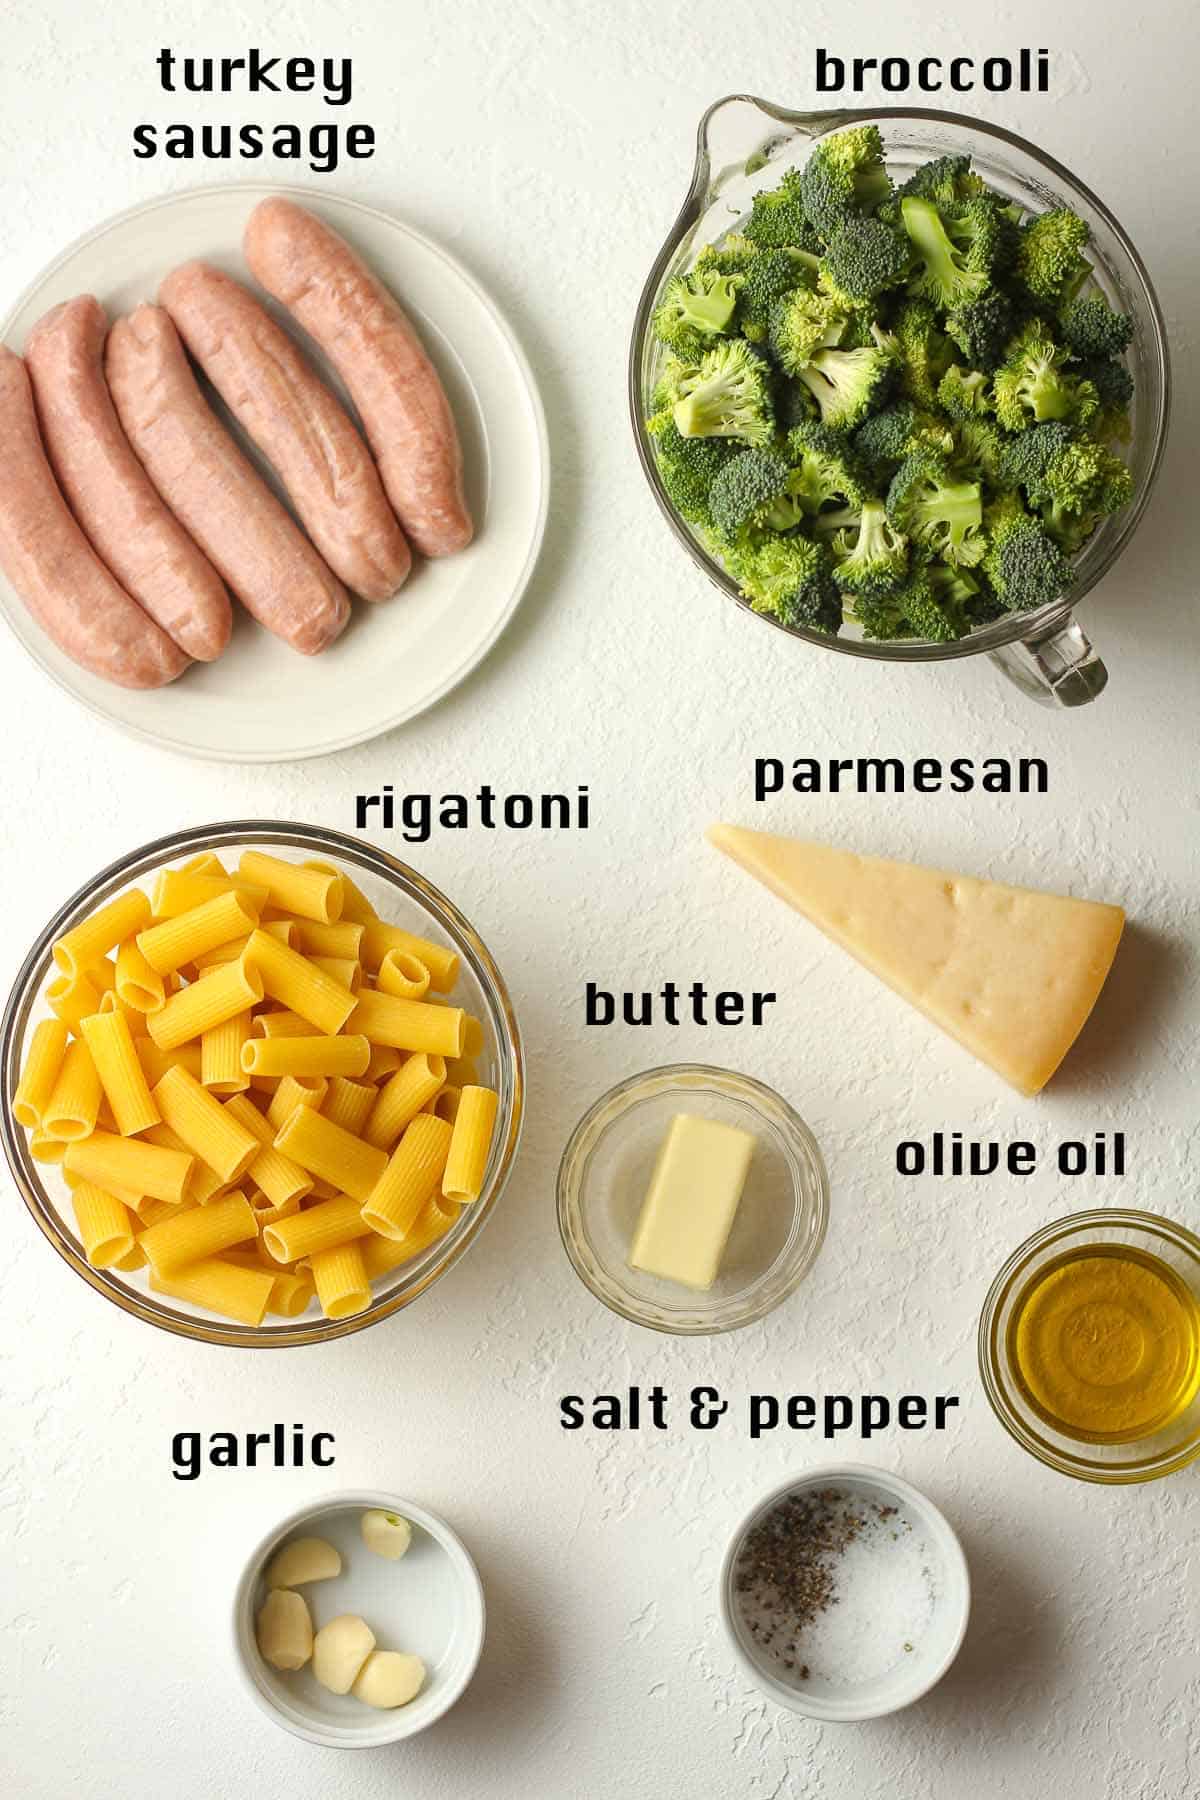 The ingredients for rigatoni with broccoli and sausage.